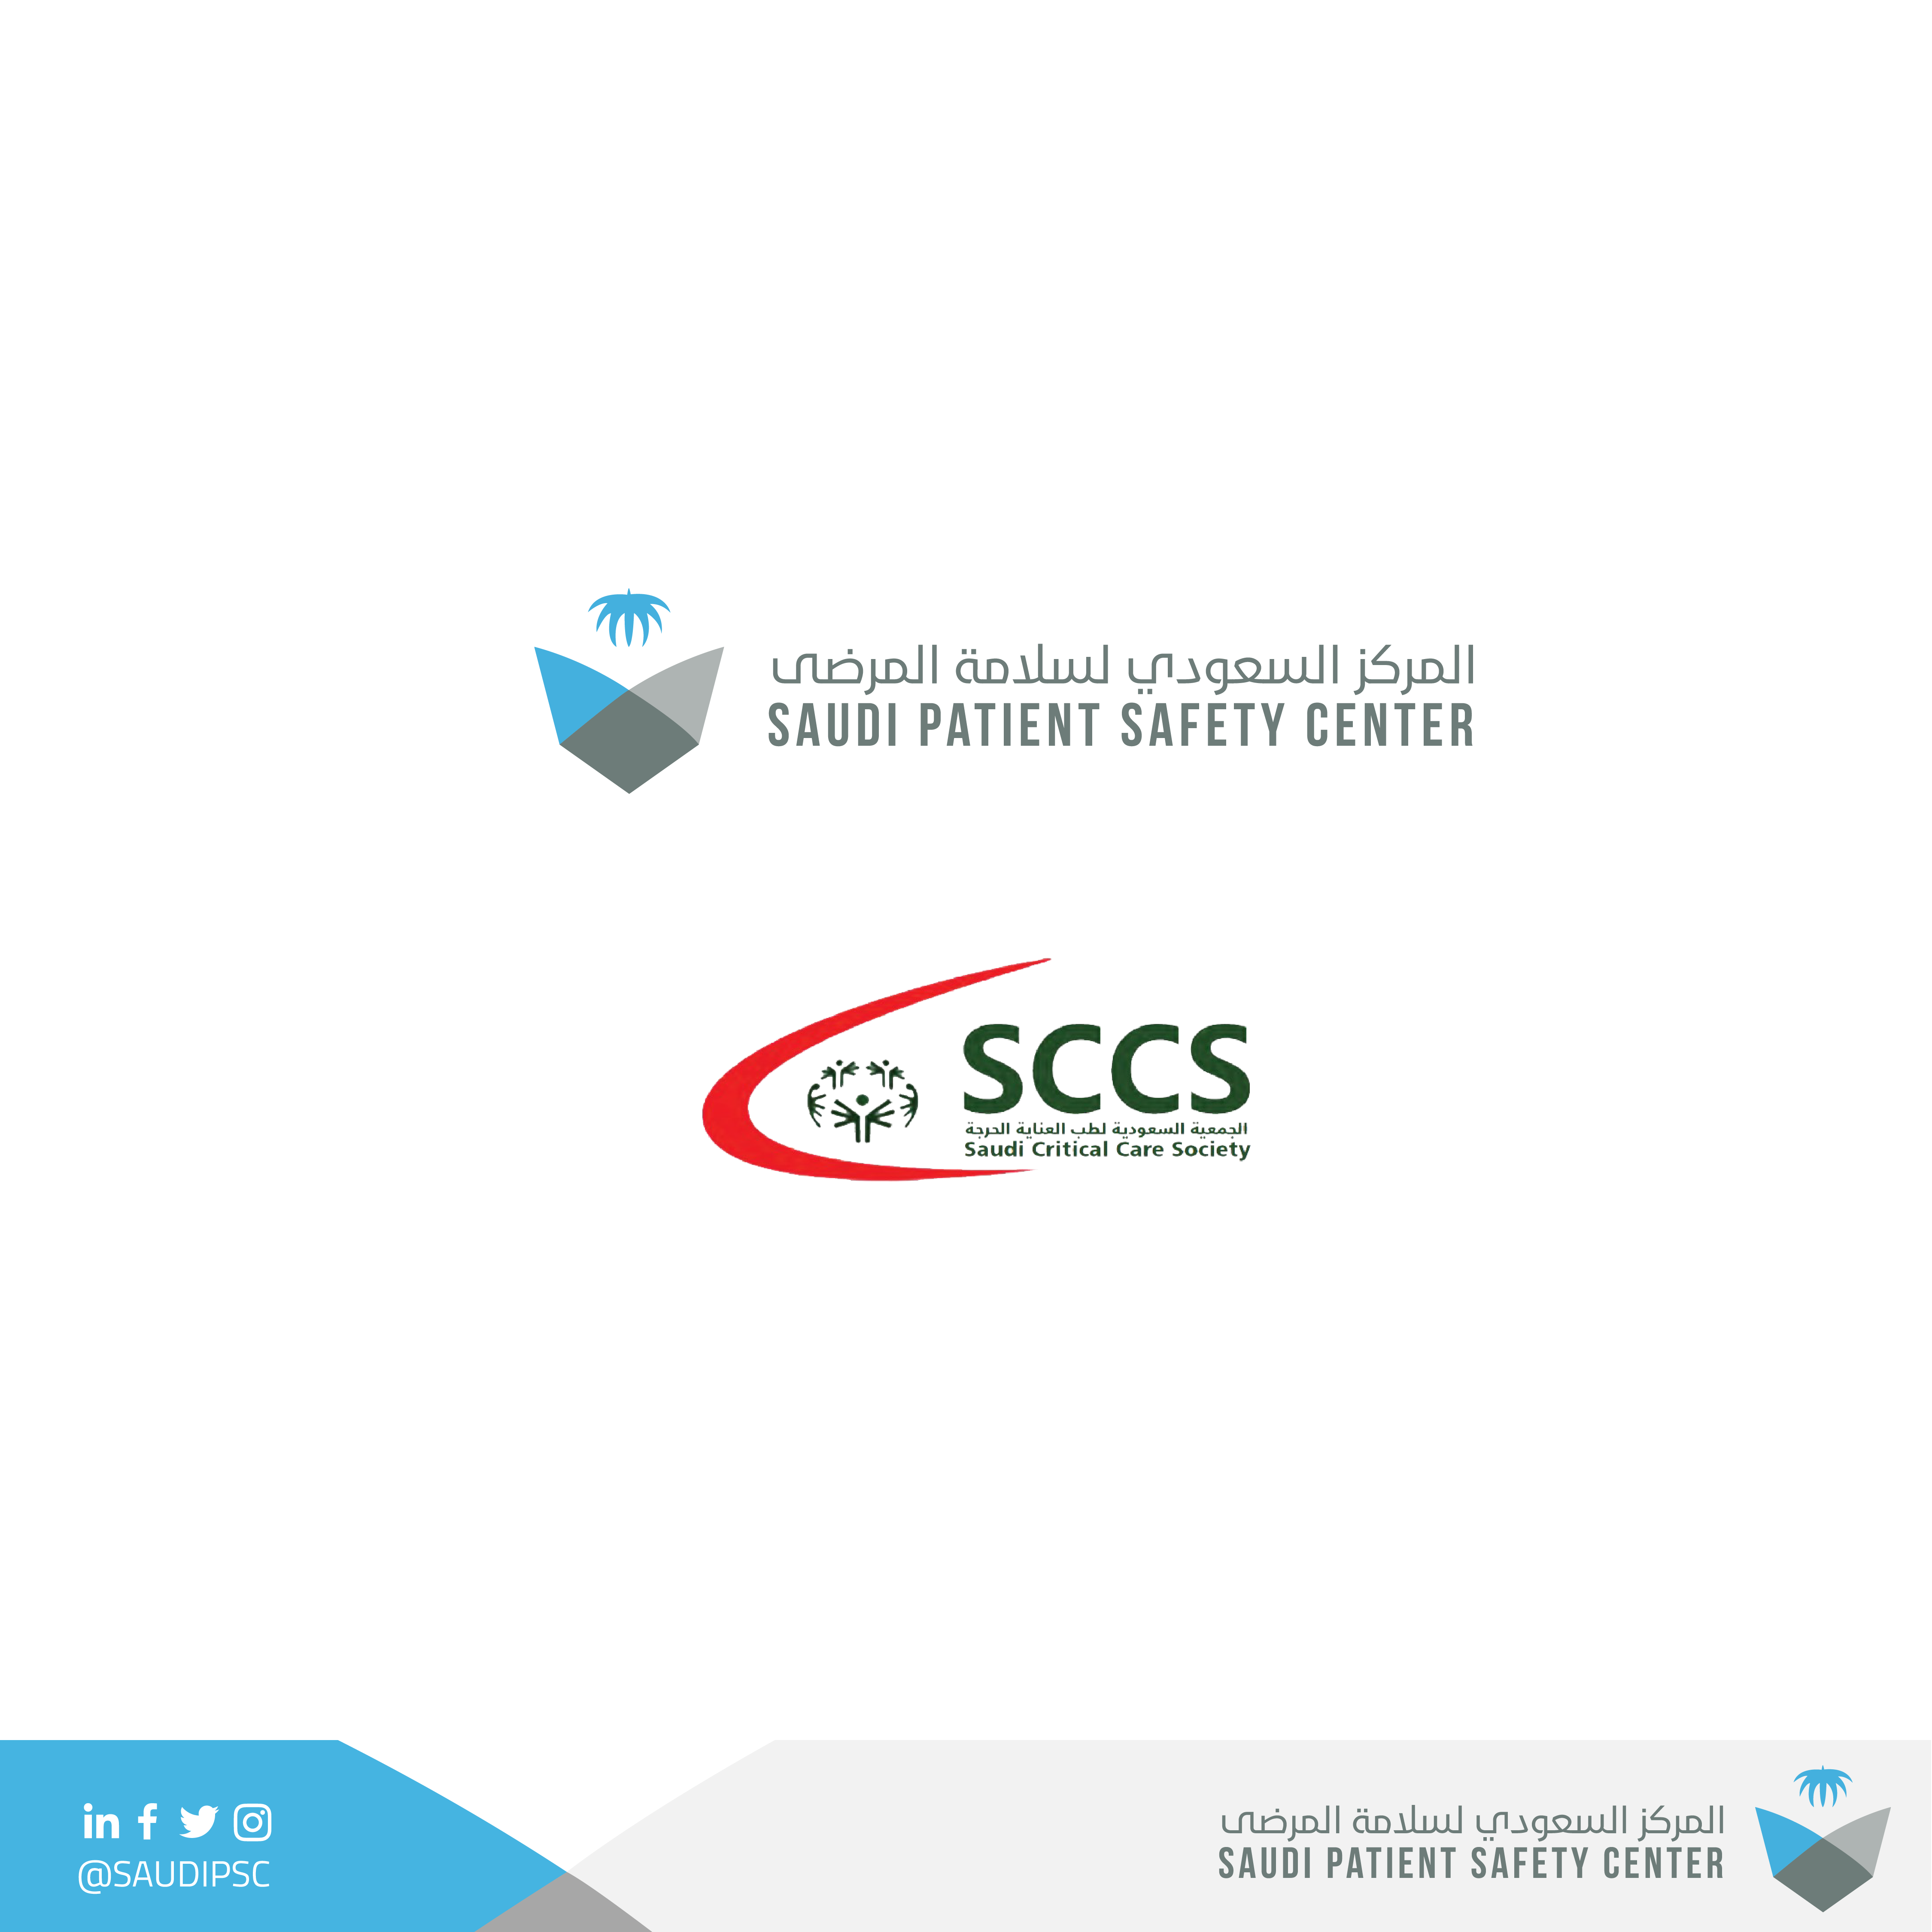 The Saudi Patient Safety Center and the Saudi Critical Care Society have signed a memorandum of understanding